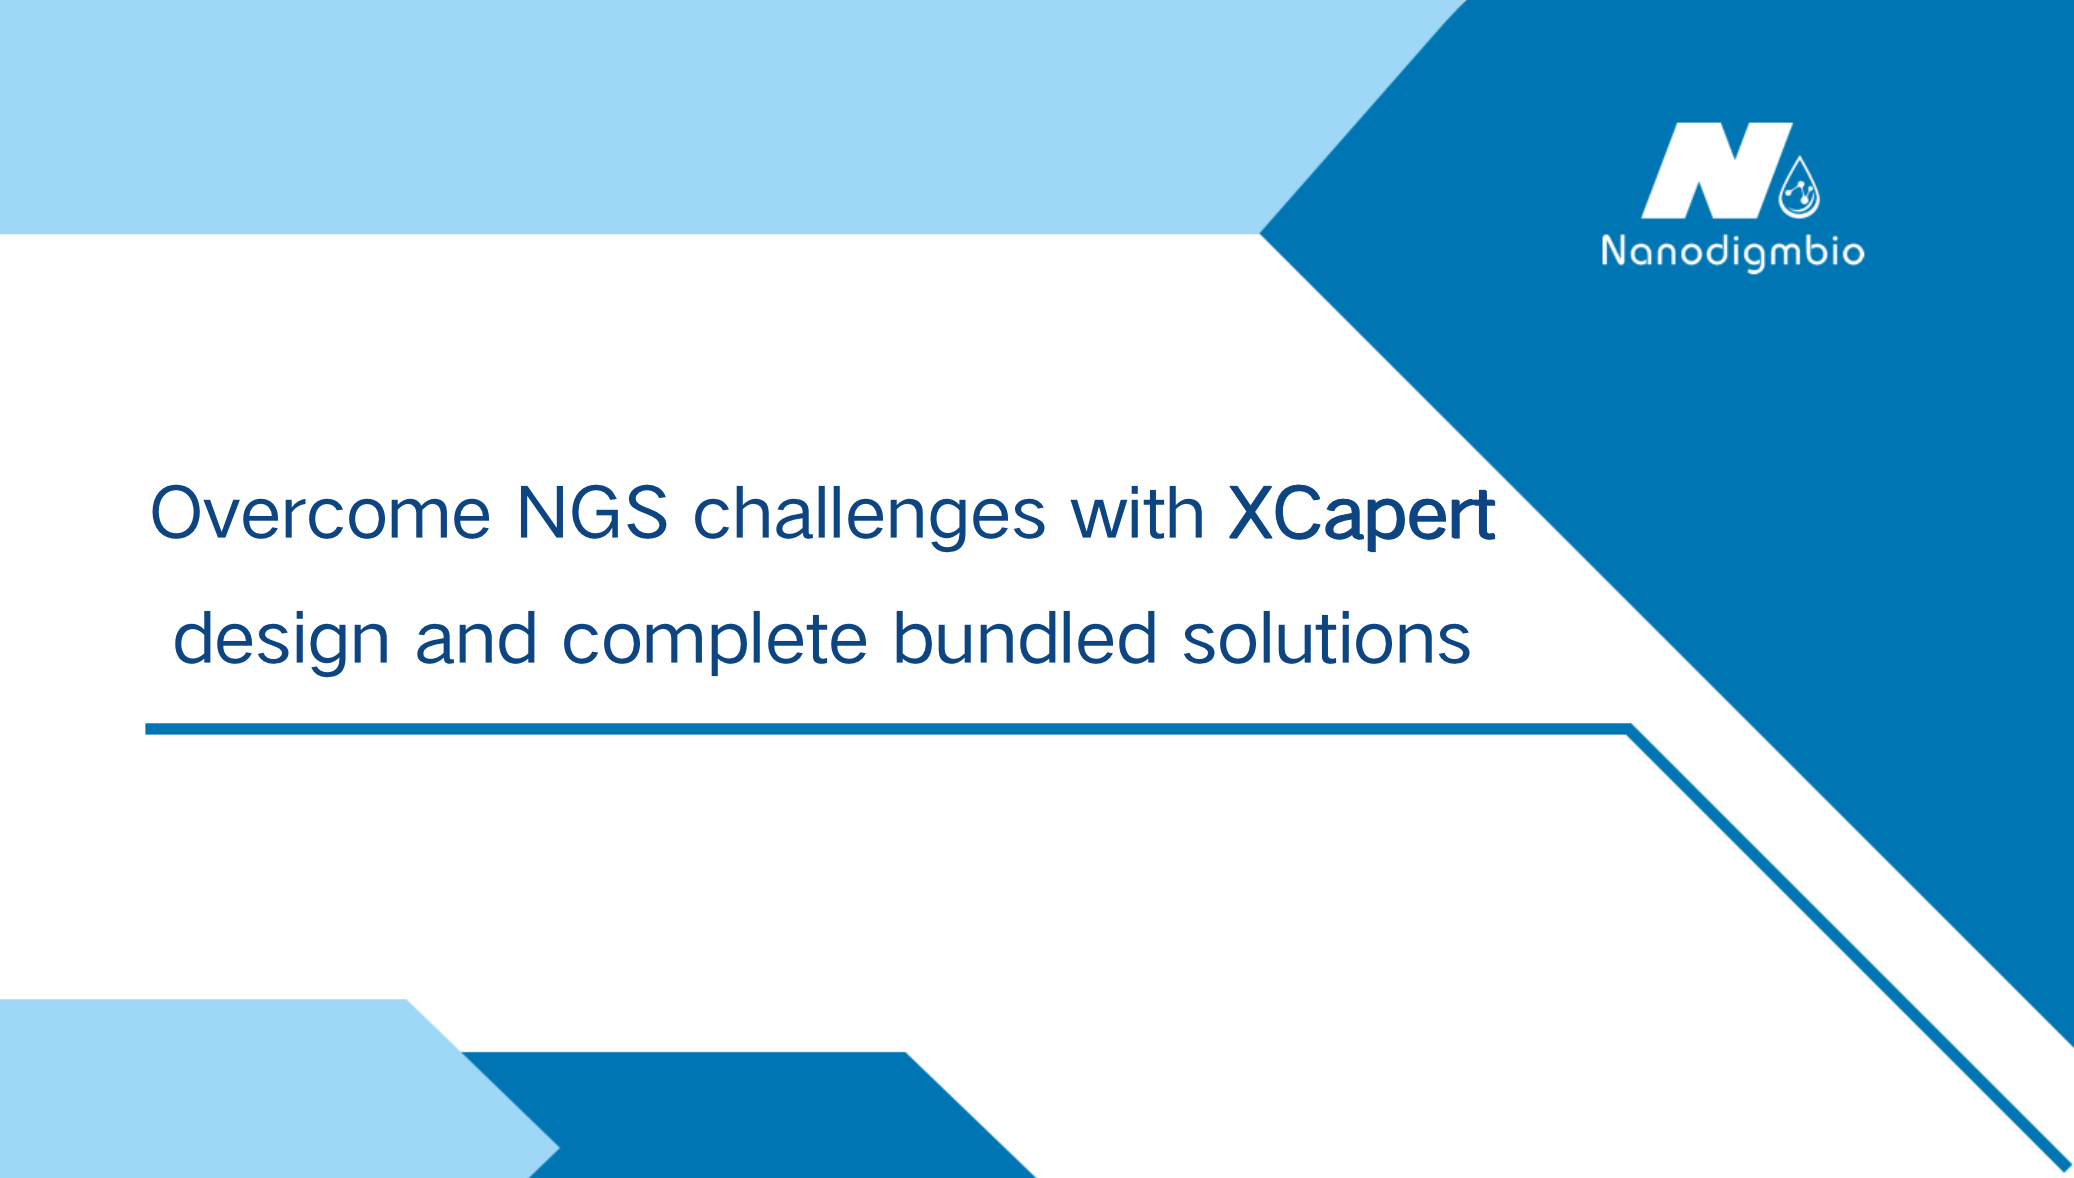 Overcome NGS challenges with XCapert design and complete bundled solutions